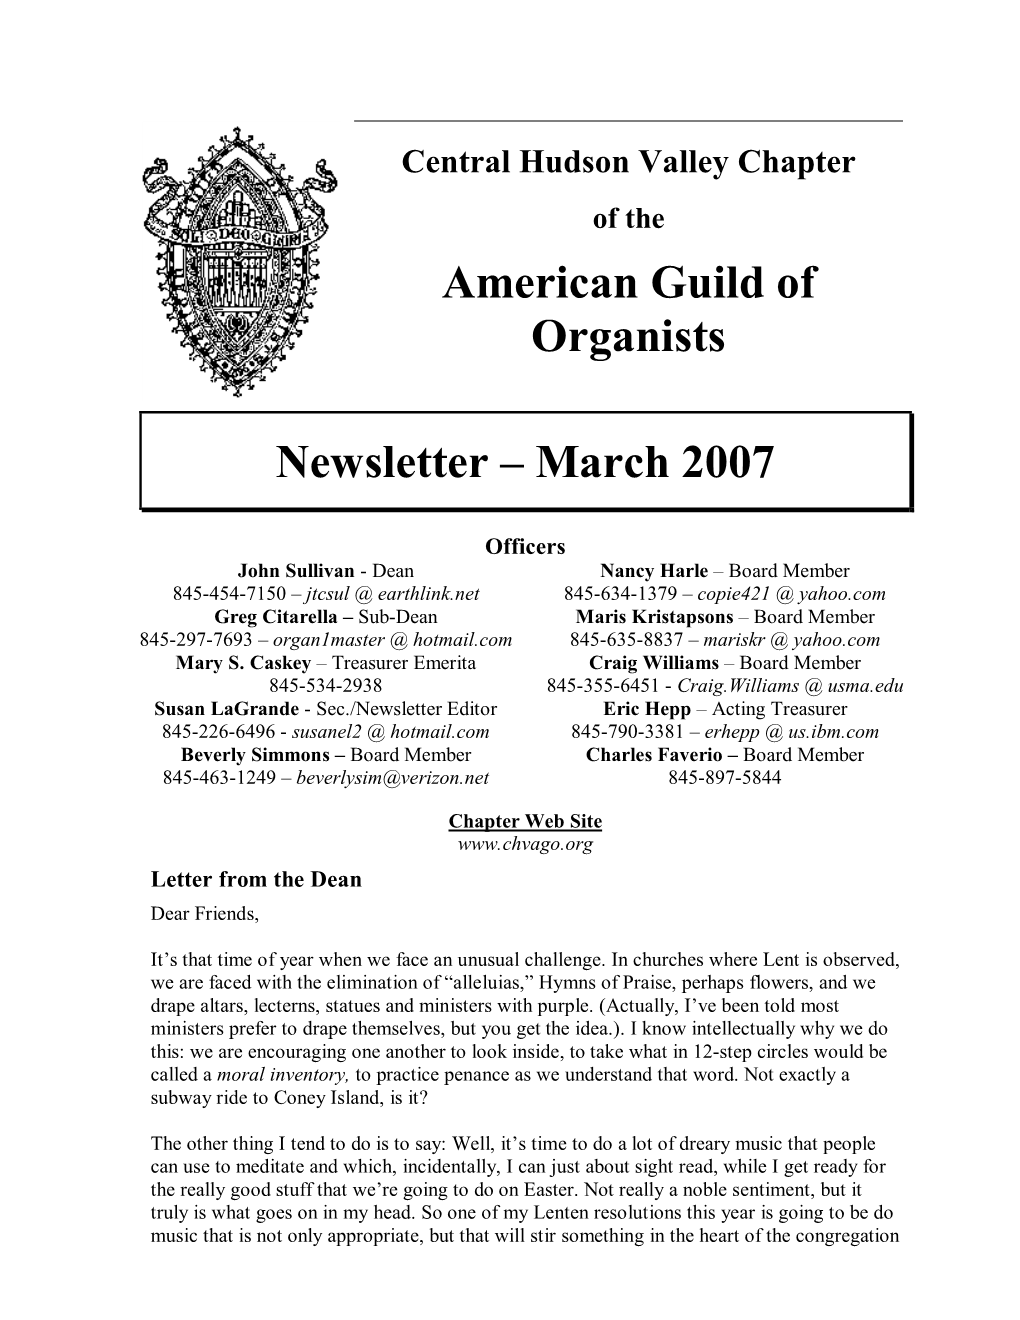 American Guild of Organists Newsletter – March 2007